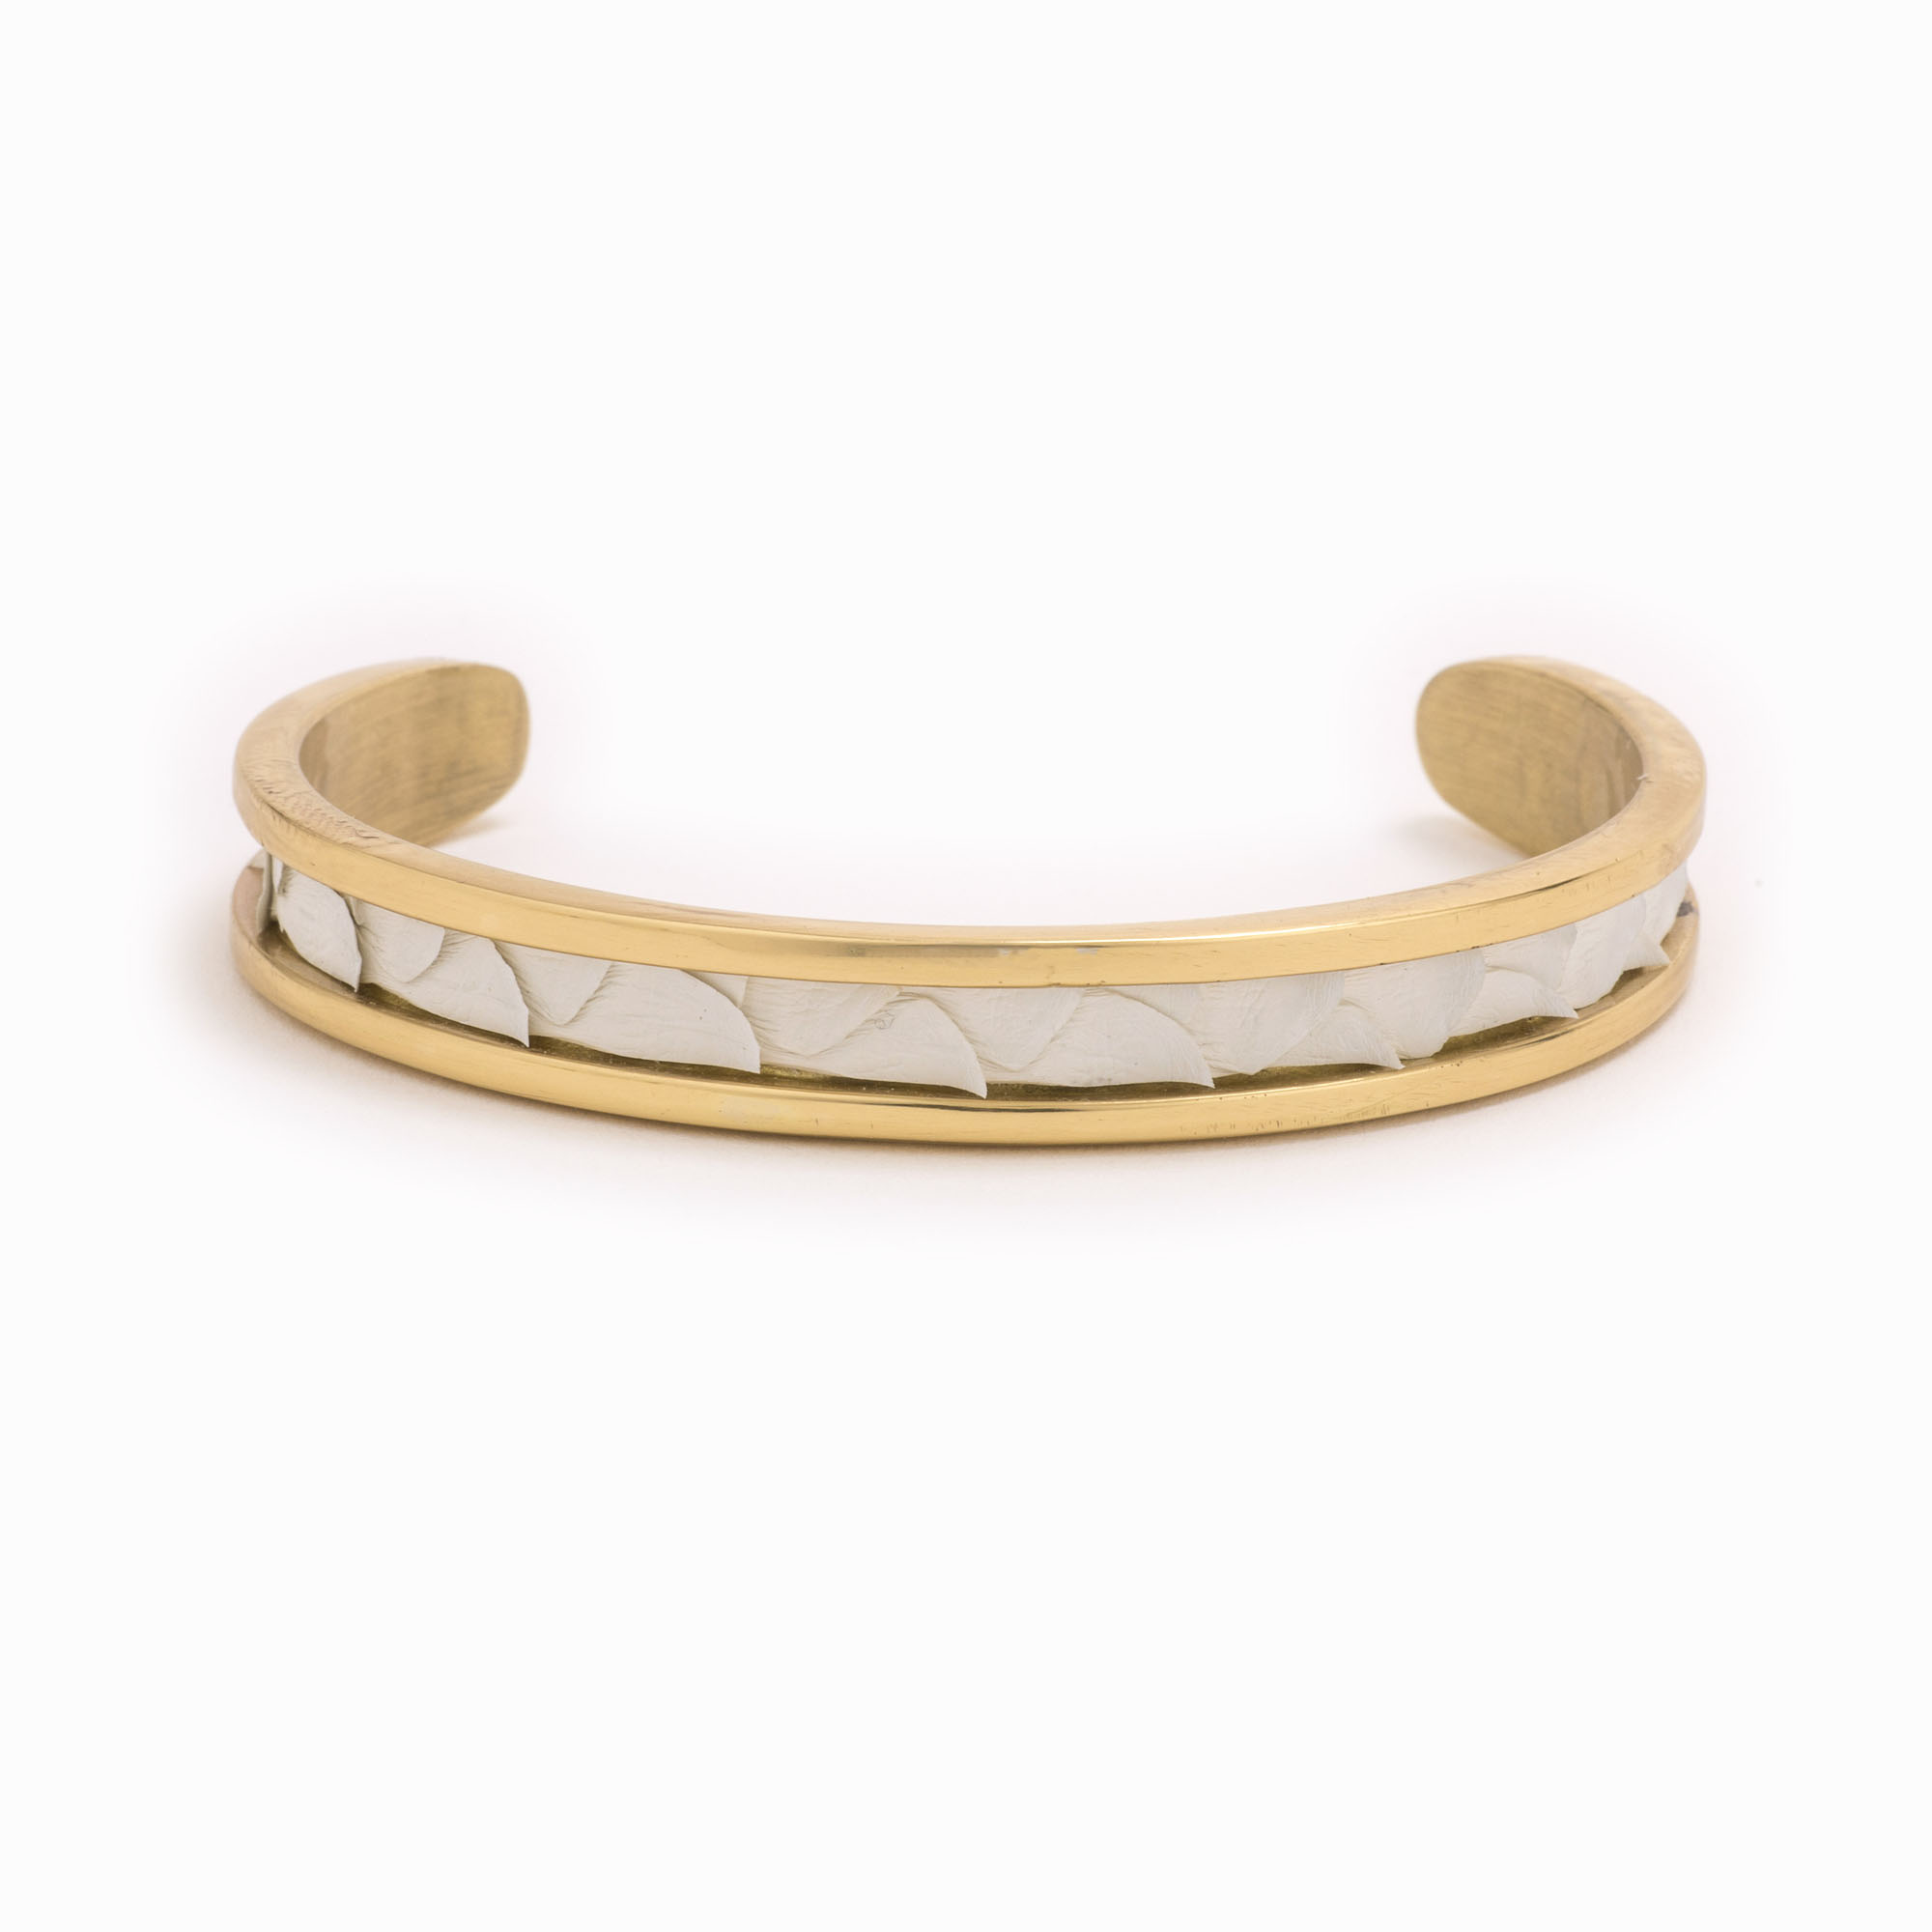 Featured image for “Small White Gold Cuff”